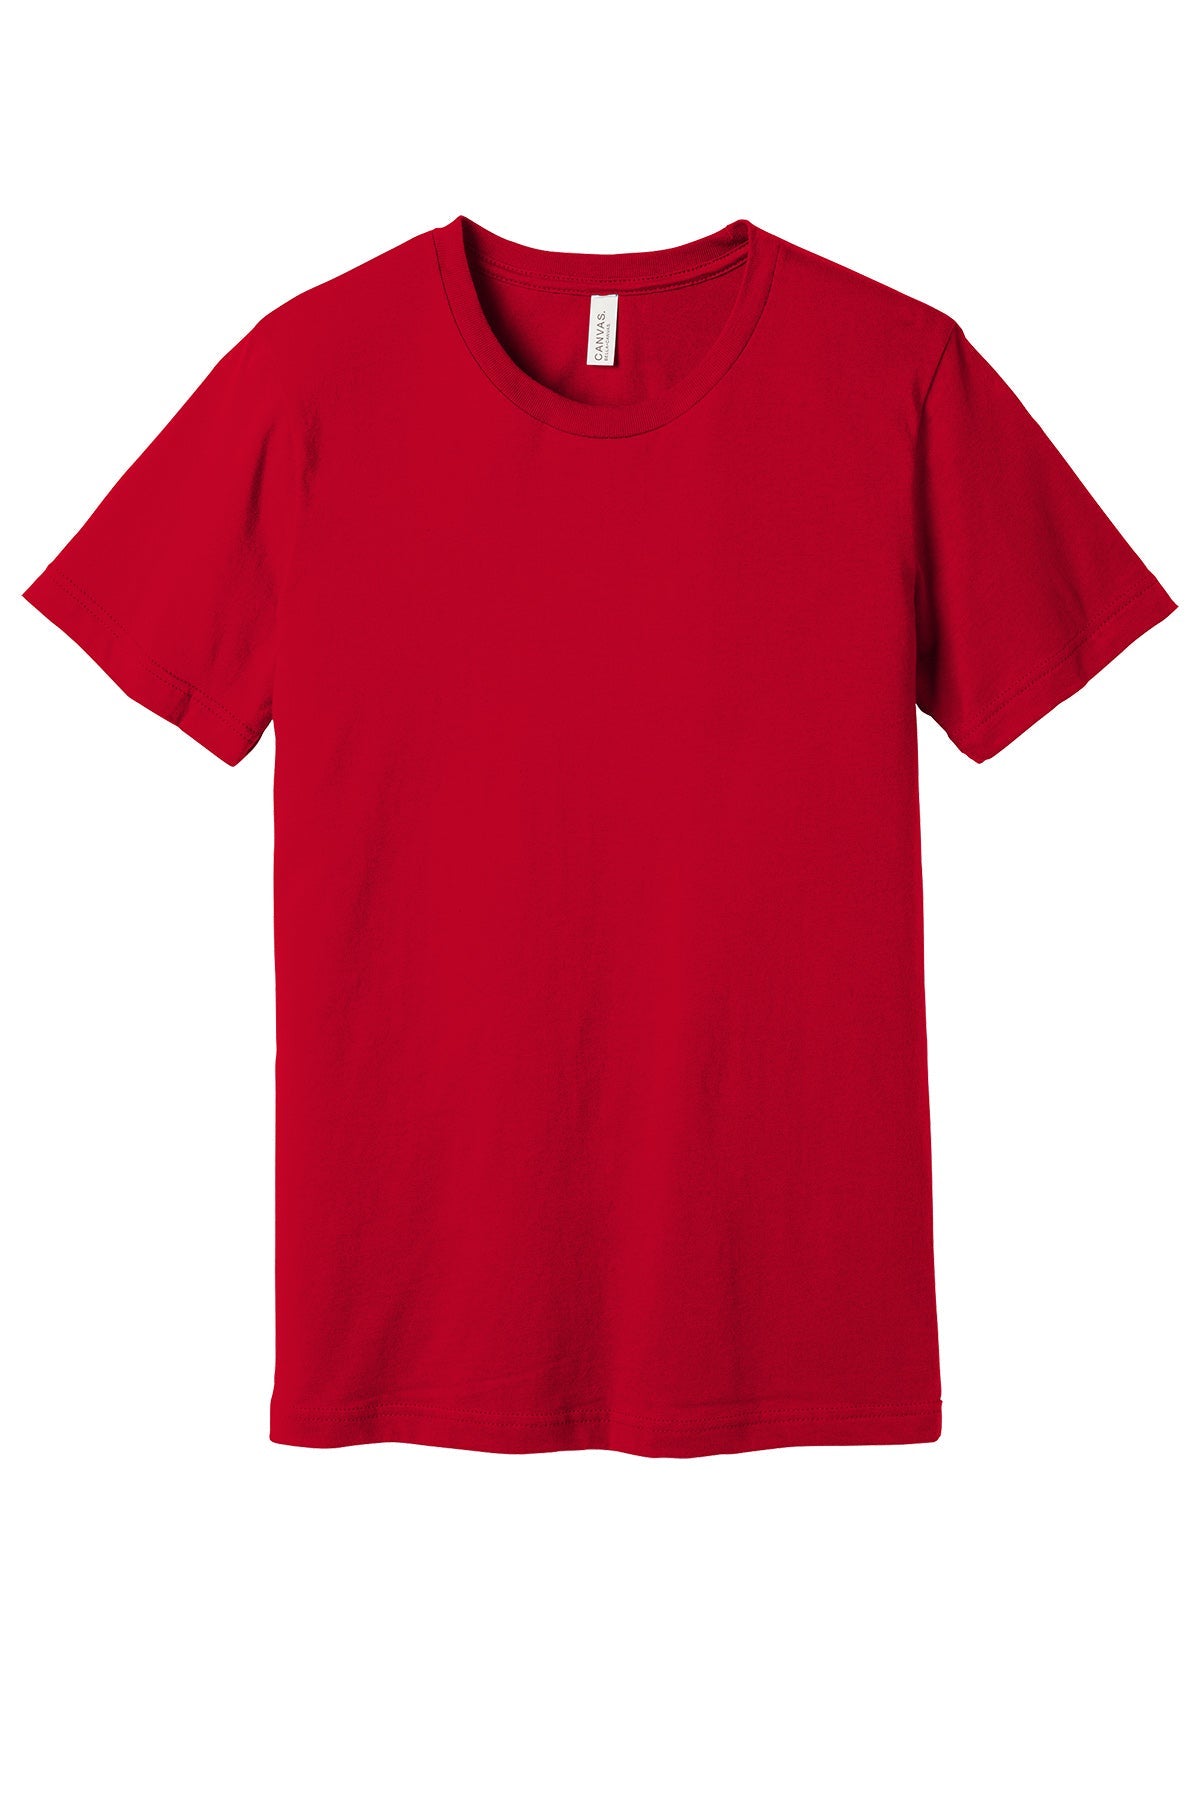 Bella+Canvas Bc3001 Adult T-Shirt Ad Small / Red